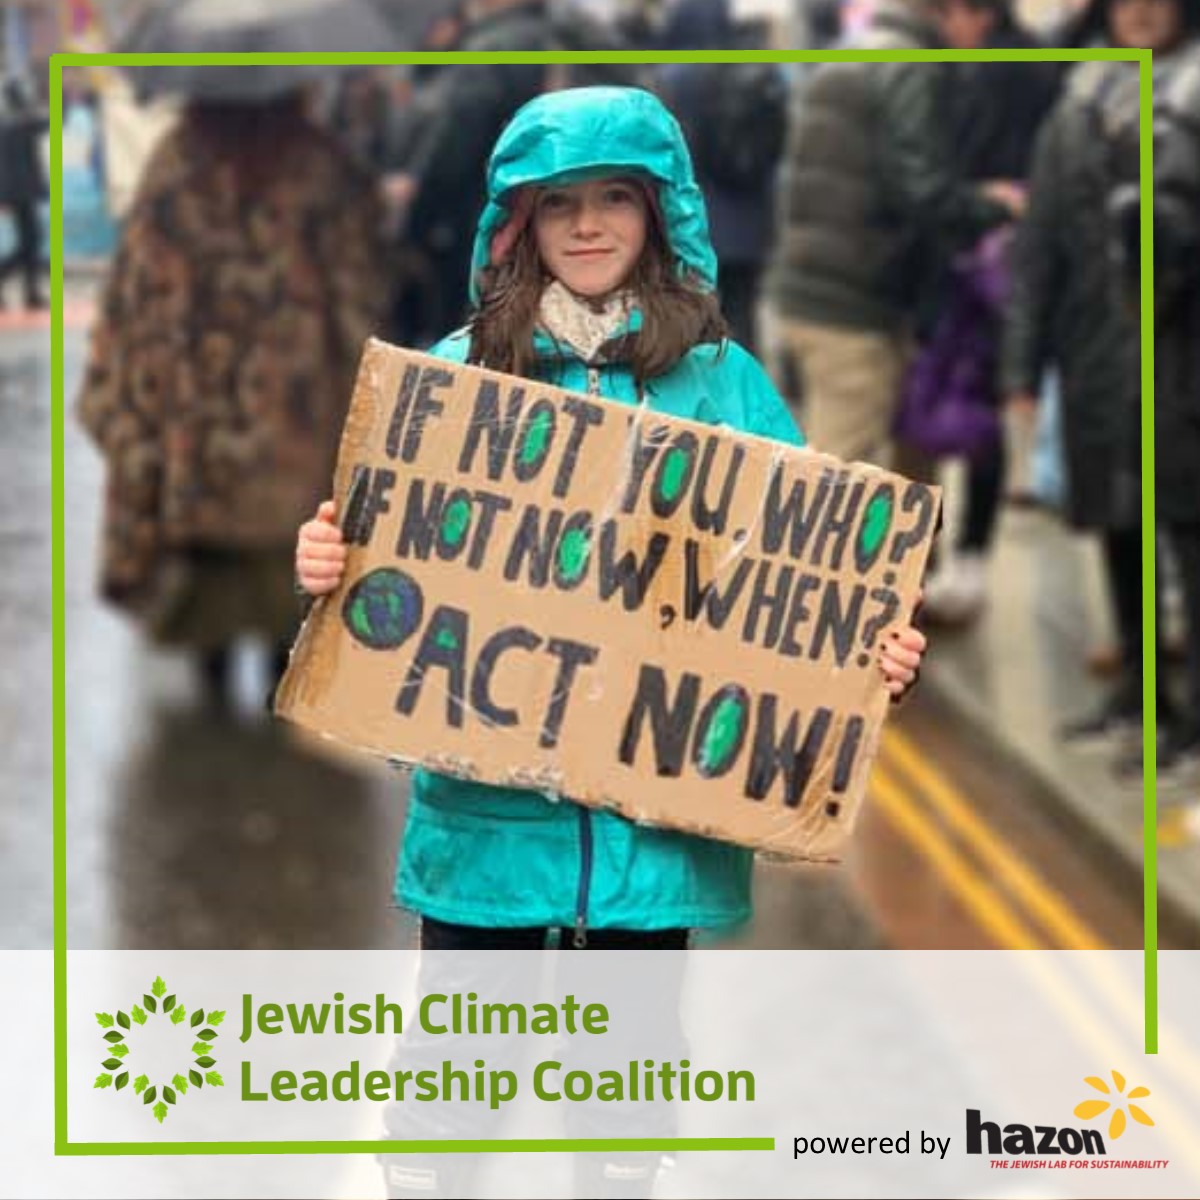 Major Jewish Organizations Form Coalition To Act On Climate Crisis